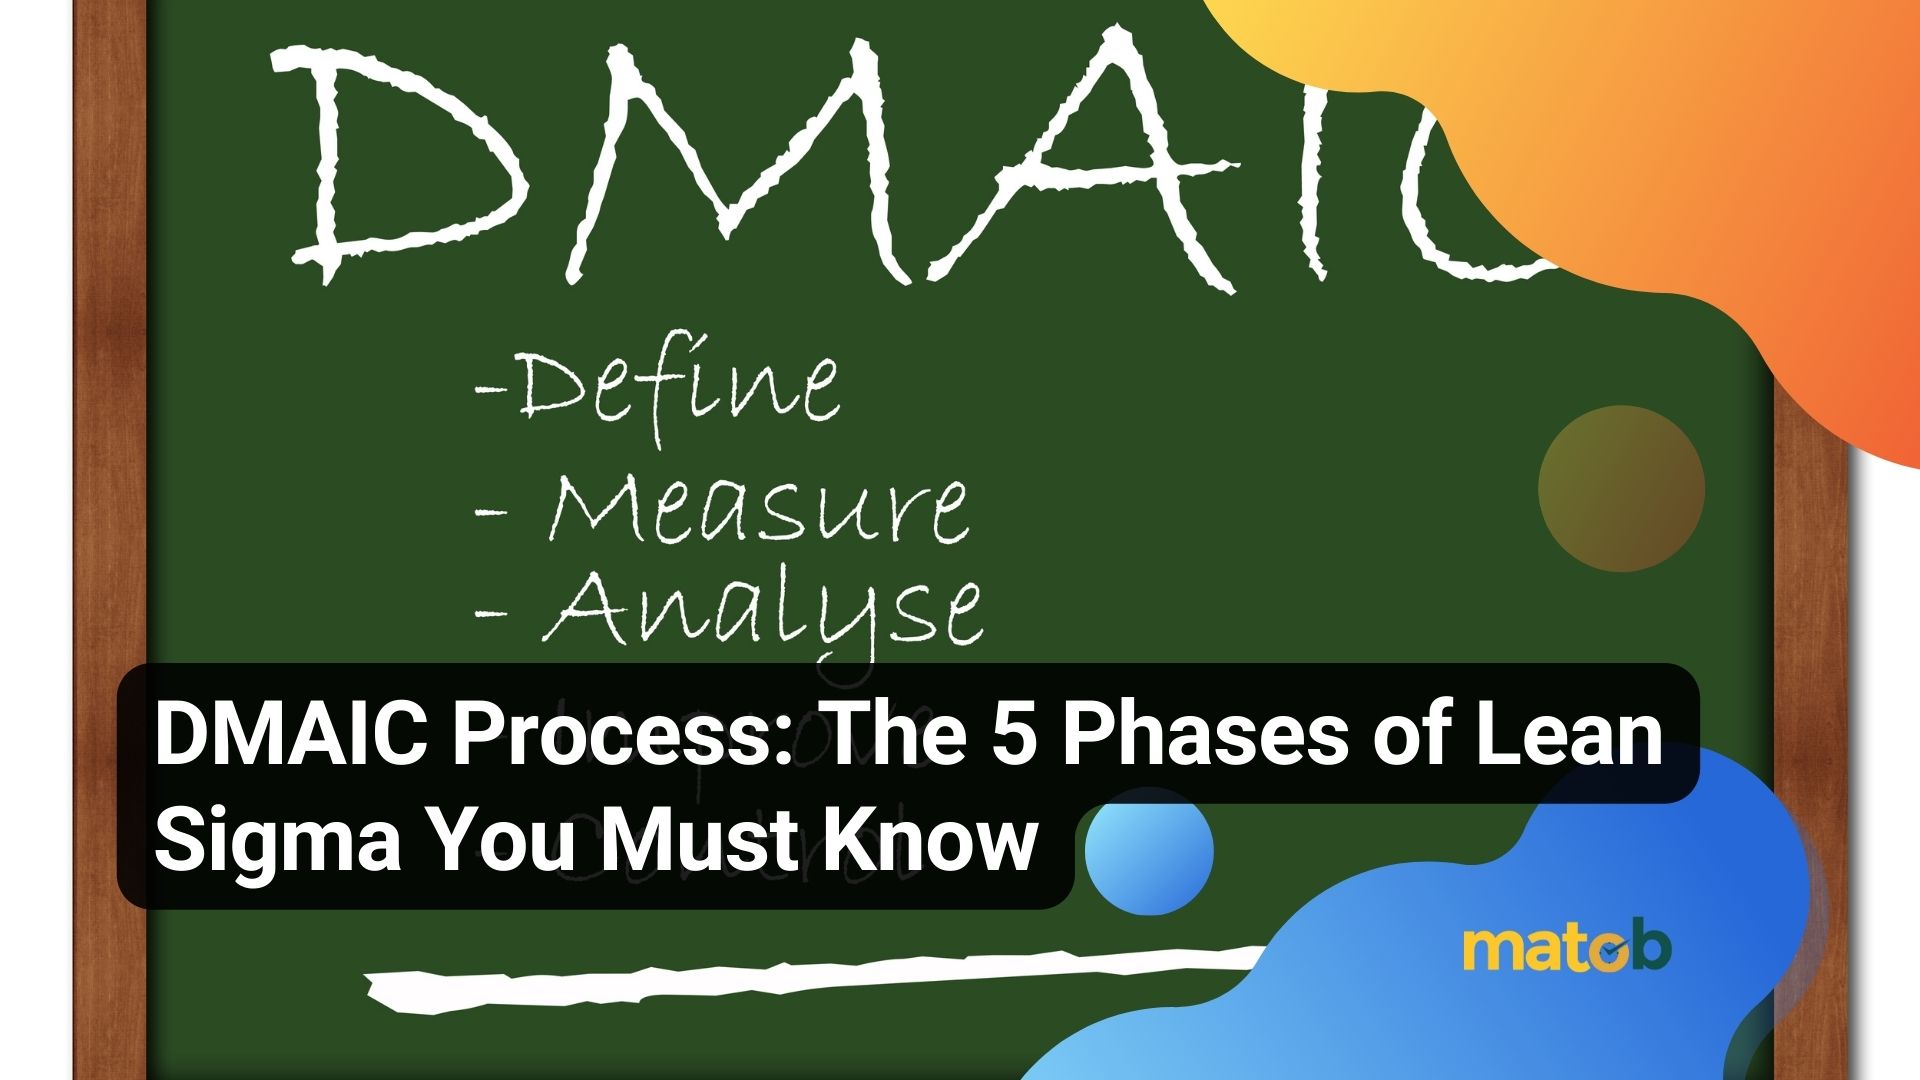 DMAIC Process: The 5 Phases of Lean Sigma You Must Know